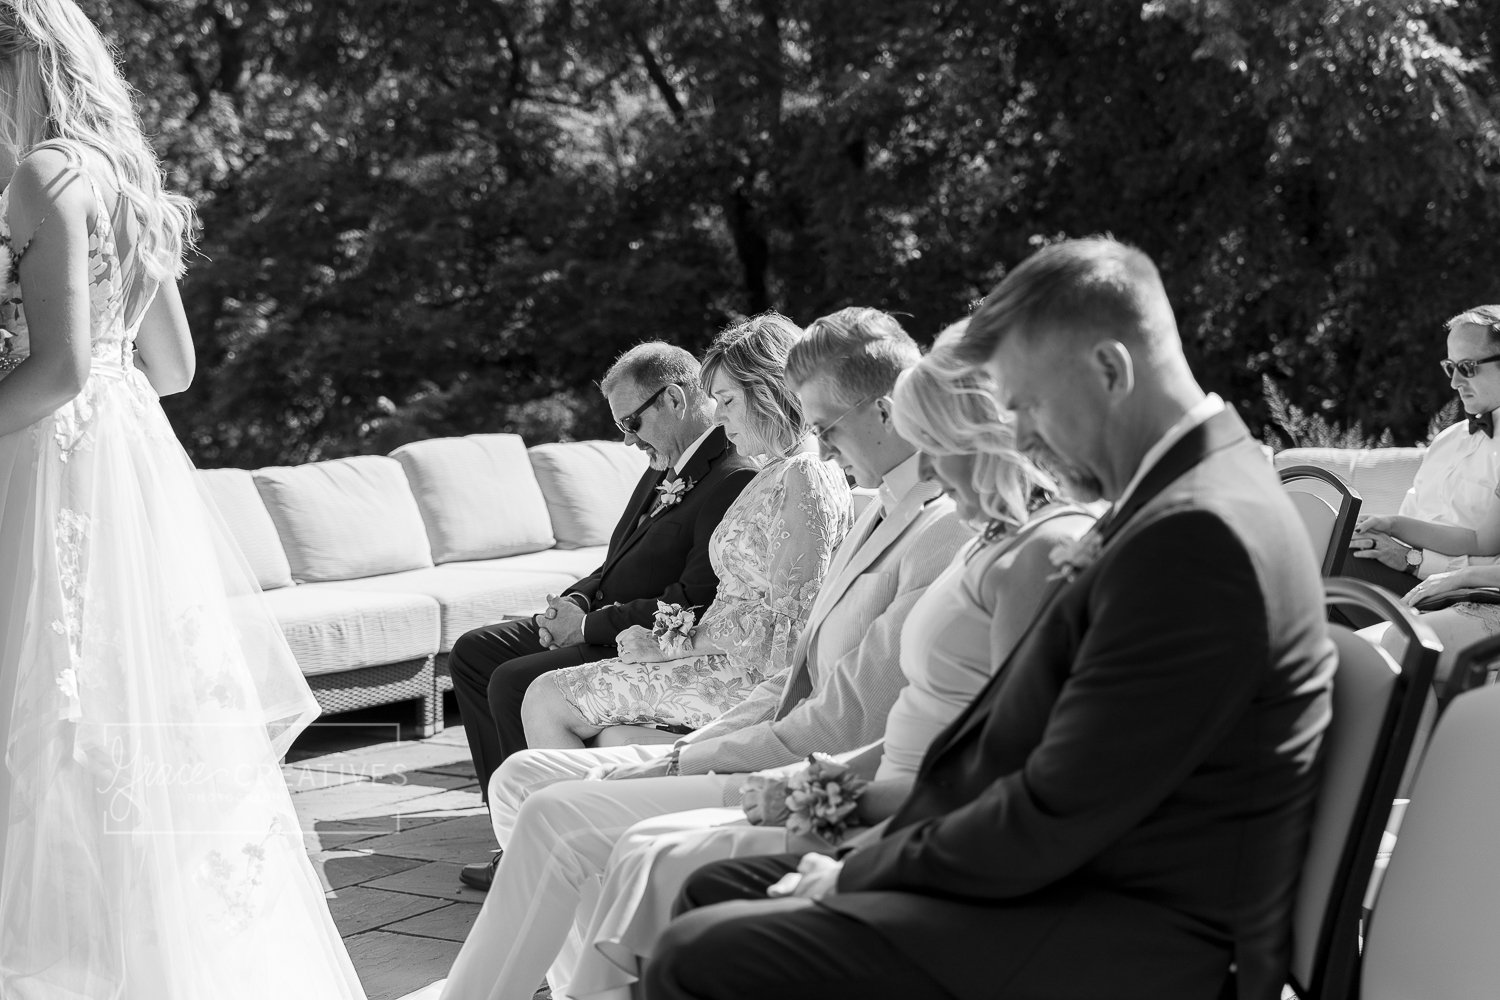 Front row of guests praying during wedding ceremony